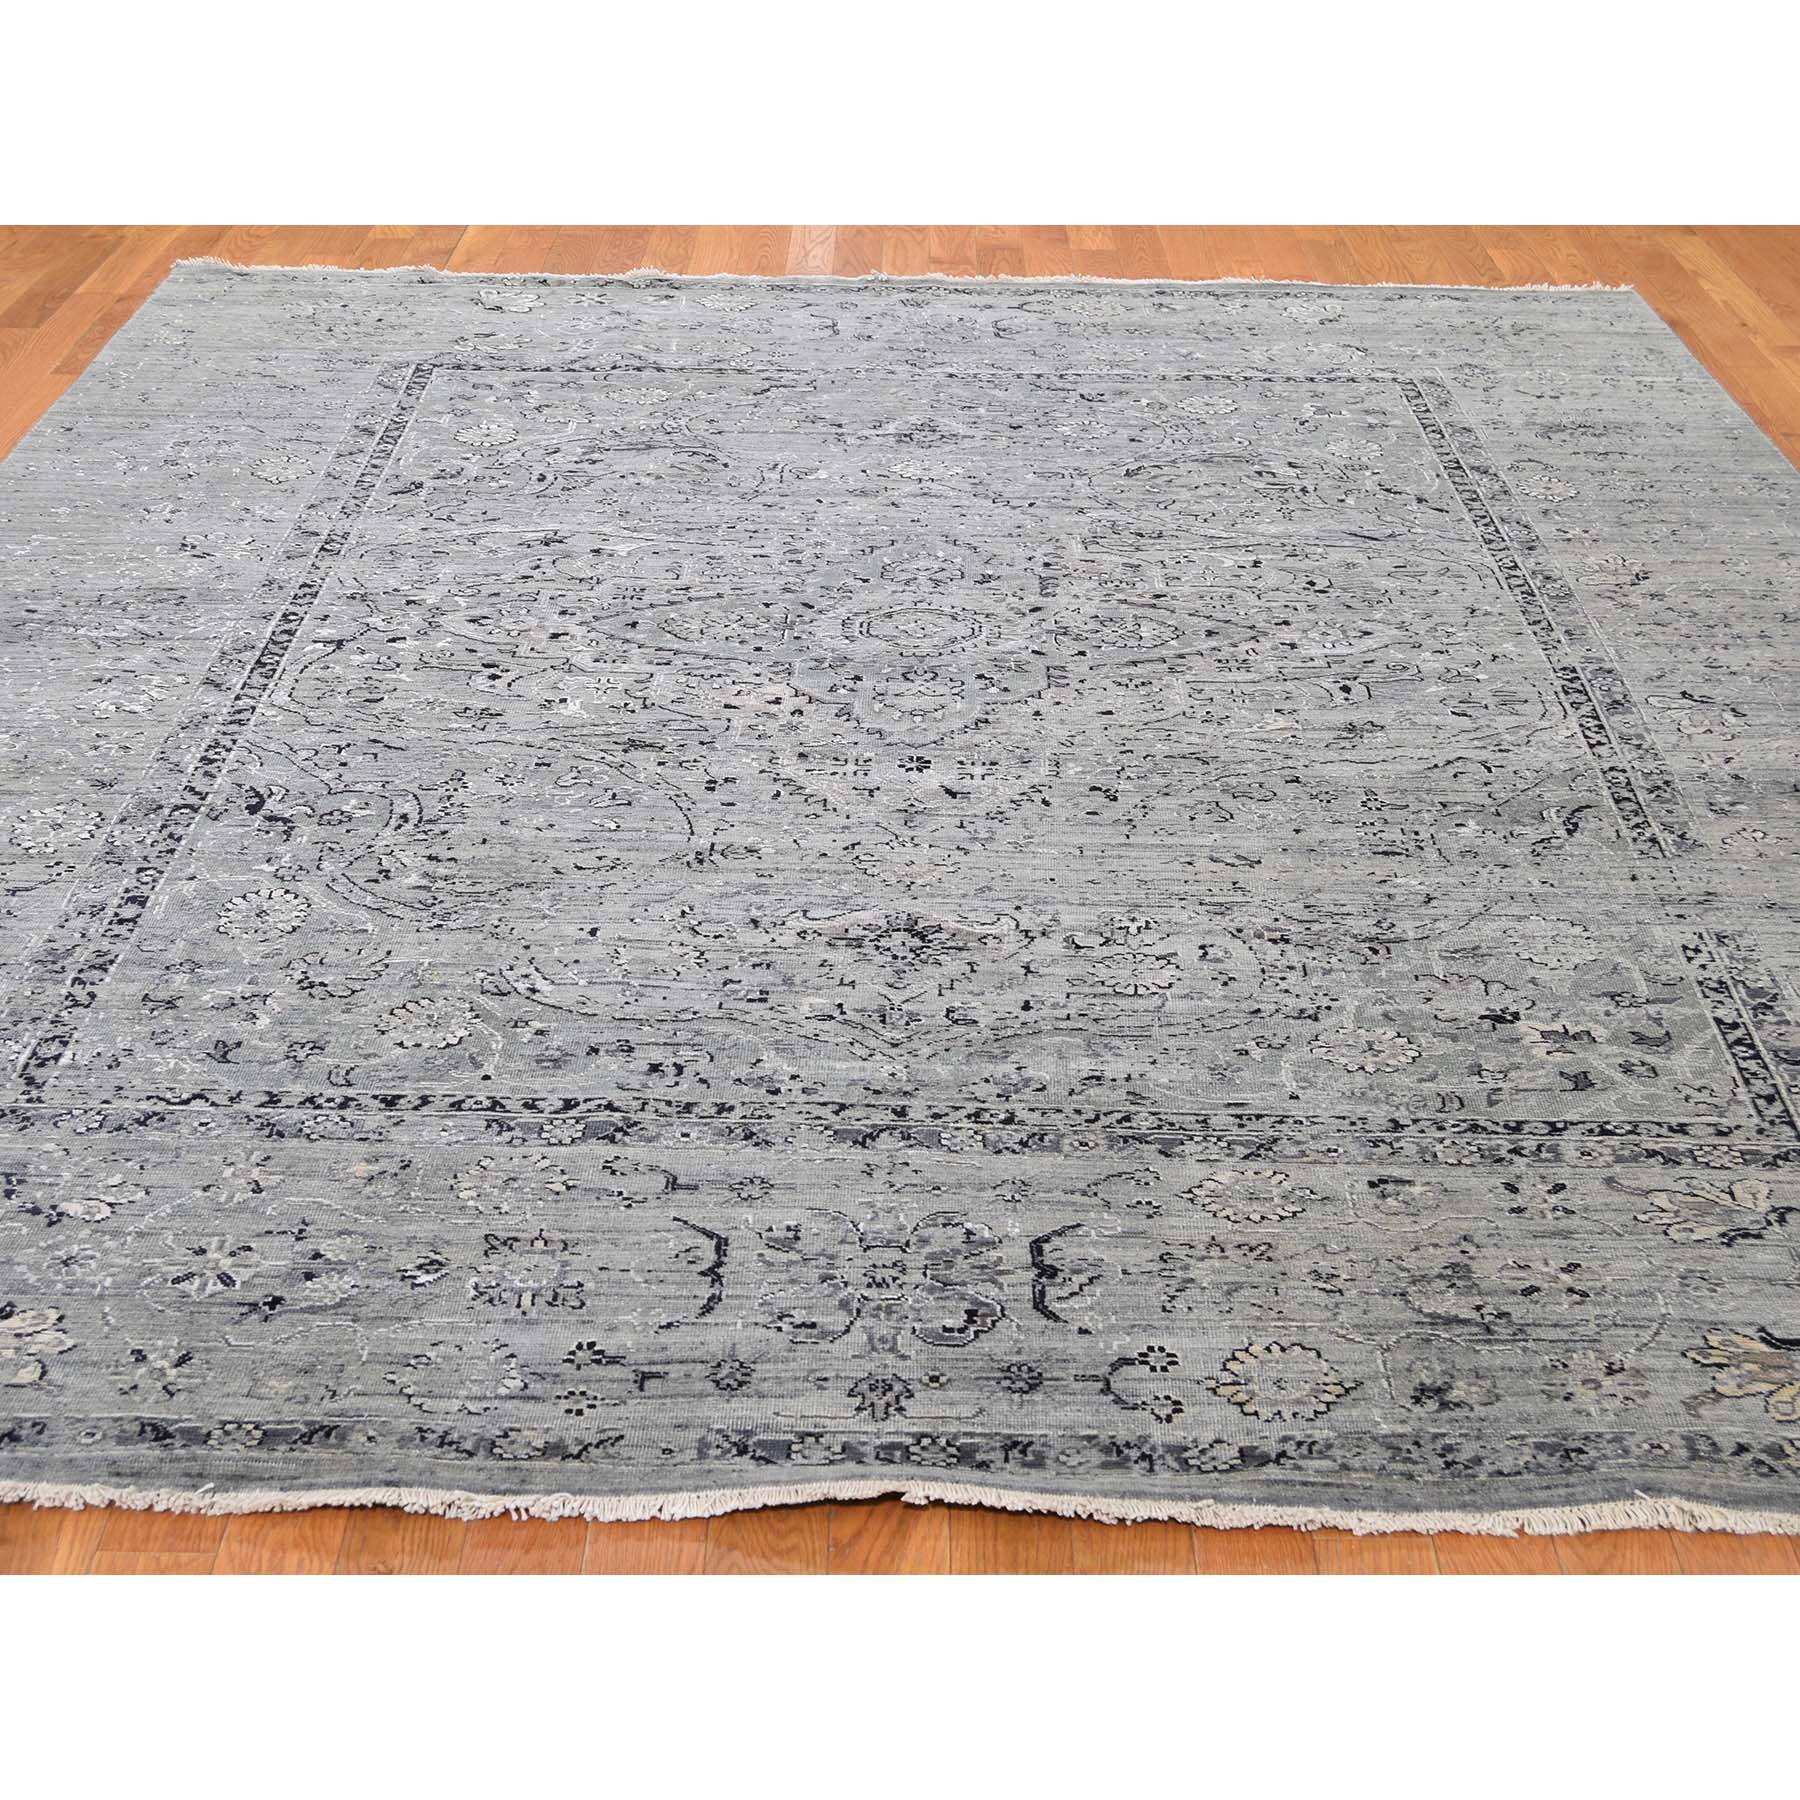 8-3 x10-1  Silk With Oxidized Wool Broken Persian Design Hand-Knotted Oriental Rug 